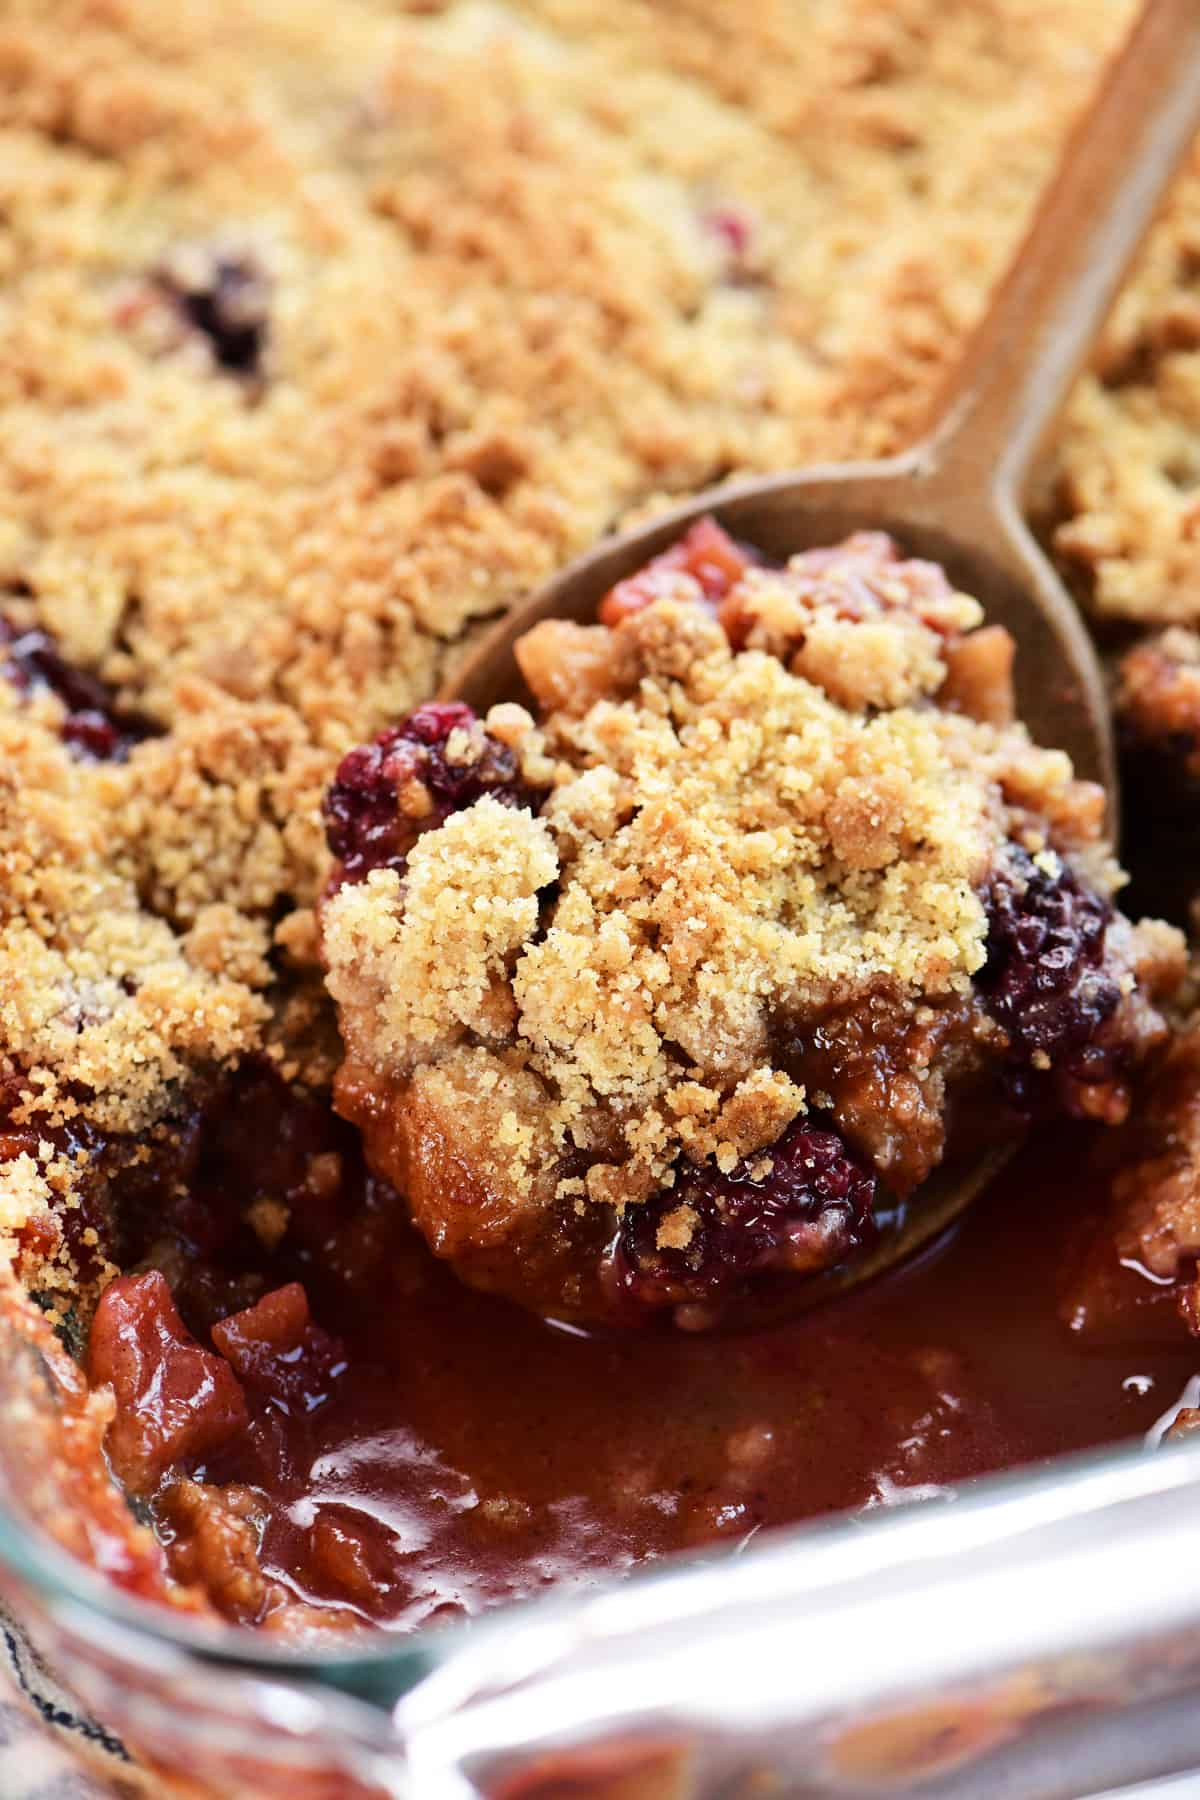 A spoon full of apple blackberry crumble.